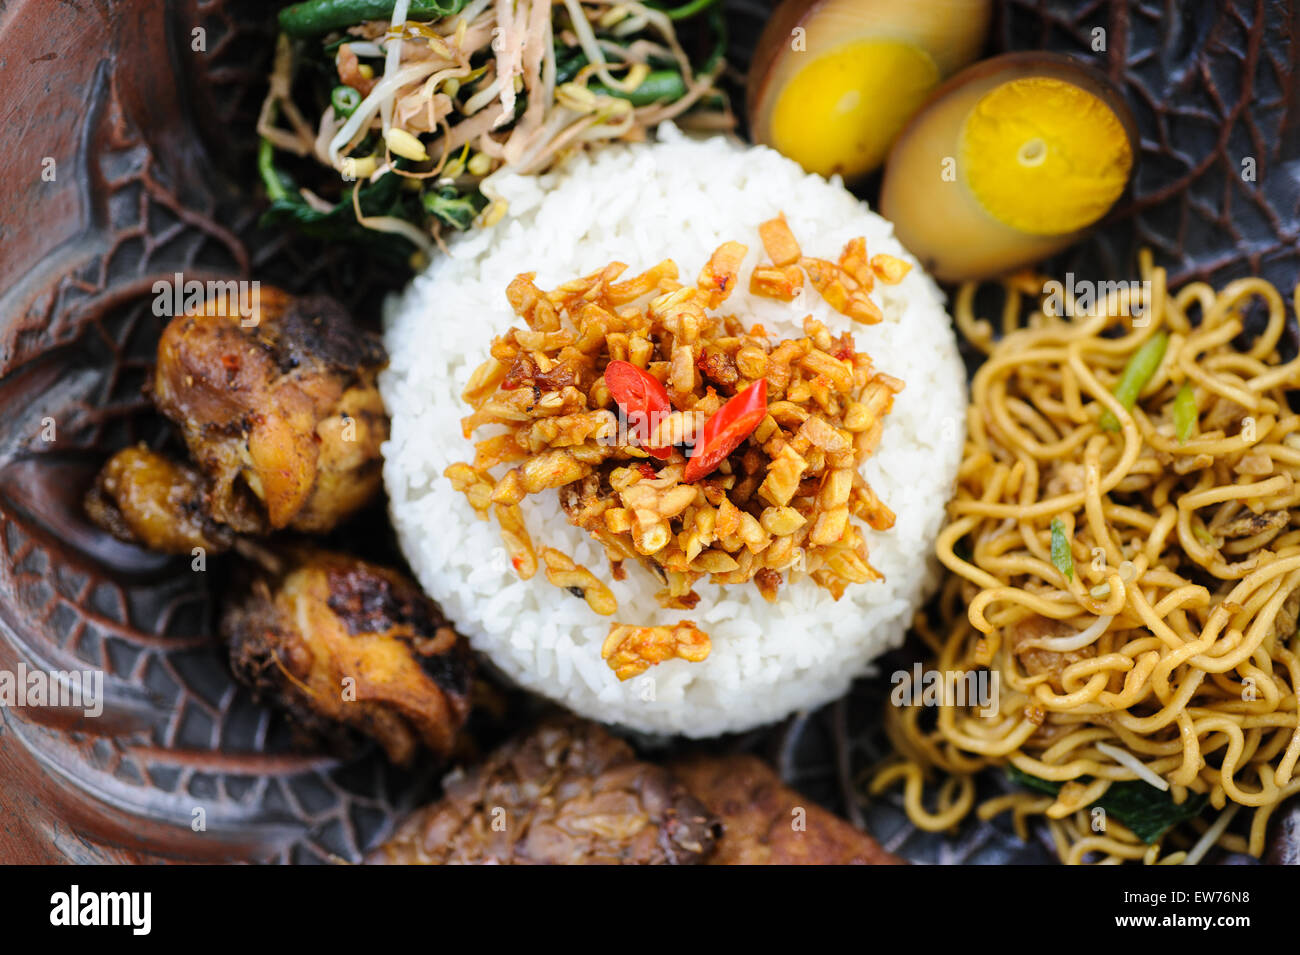 Indonesian nasi campur with fried chicken, noodles, eggs, tempeh and vegetables. Stock Photo